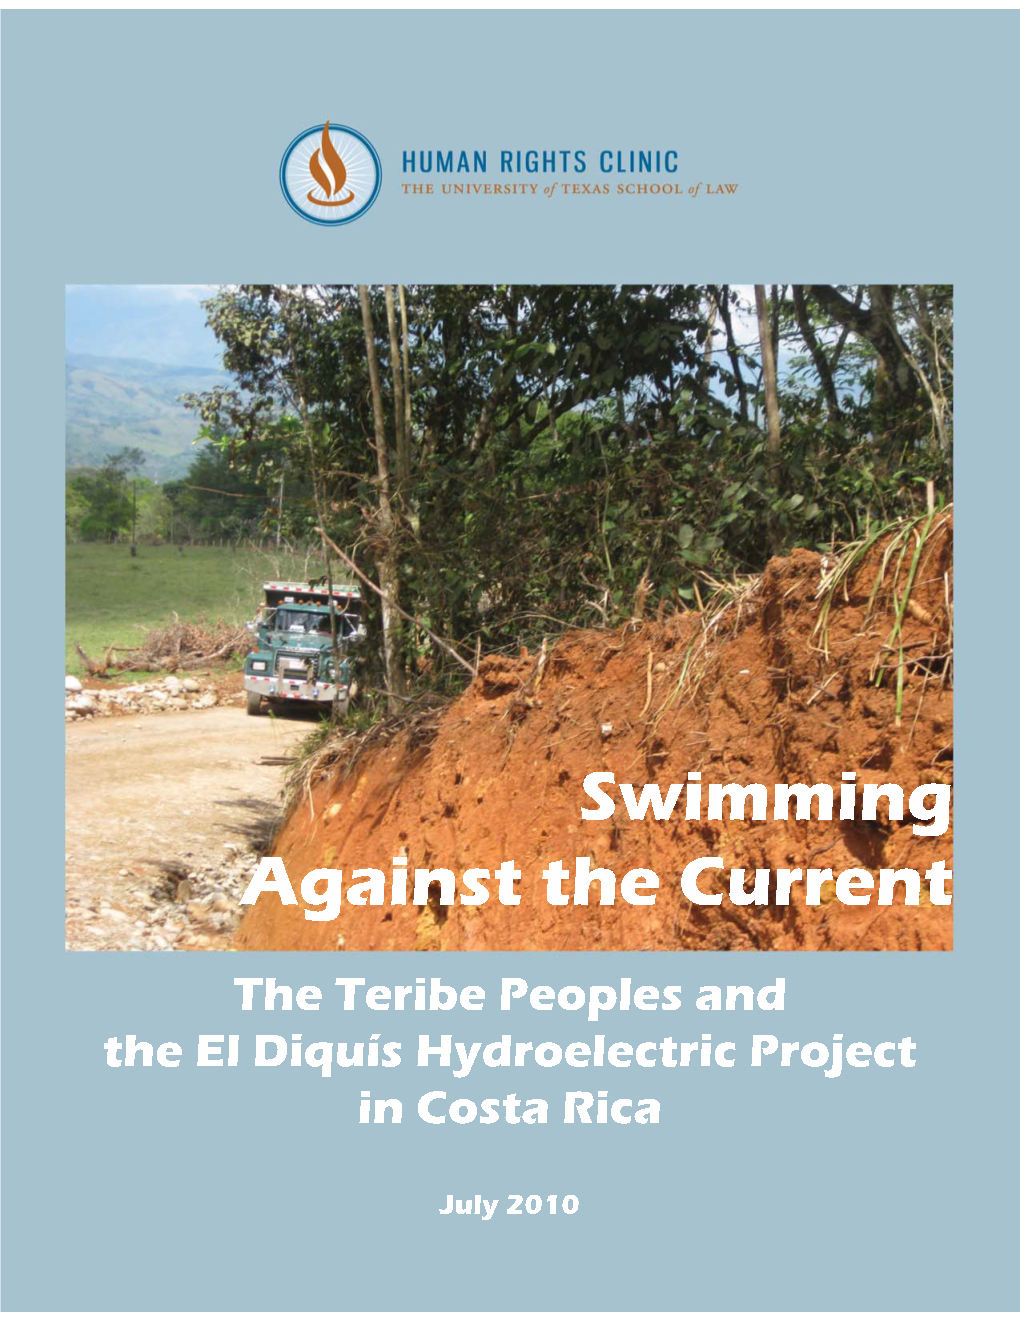 The Teribe Peoples and the El Diquis Hydroelectric Project in Costa Rica